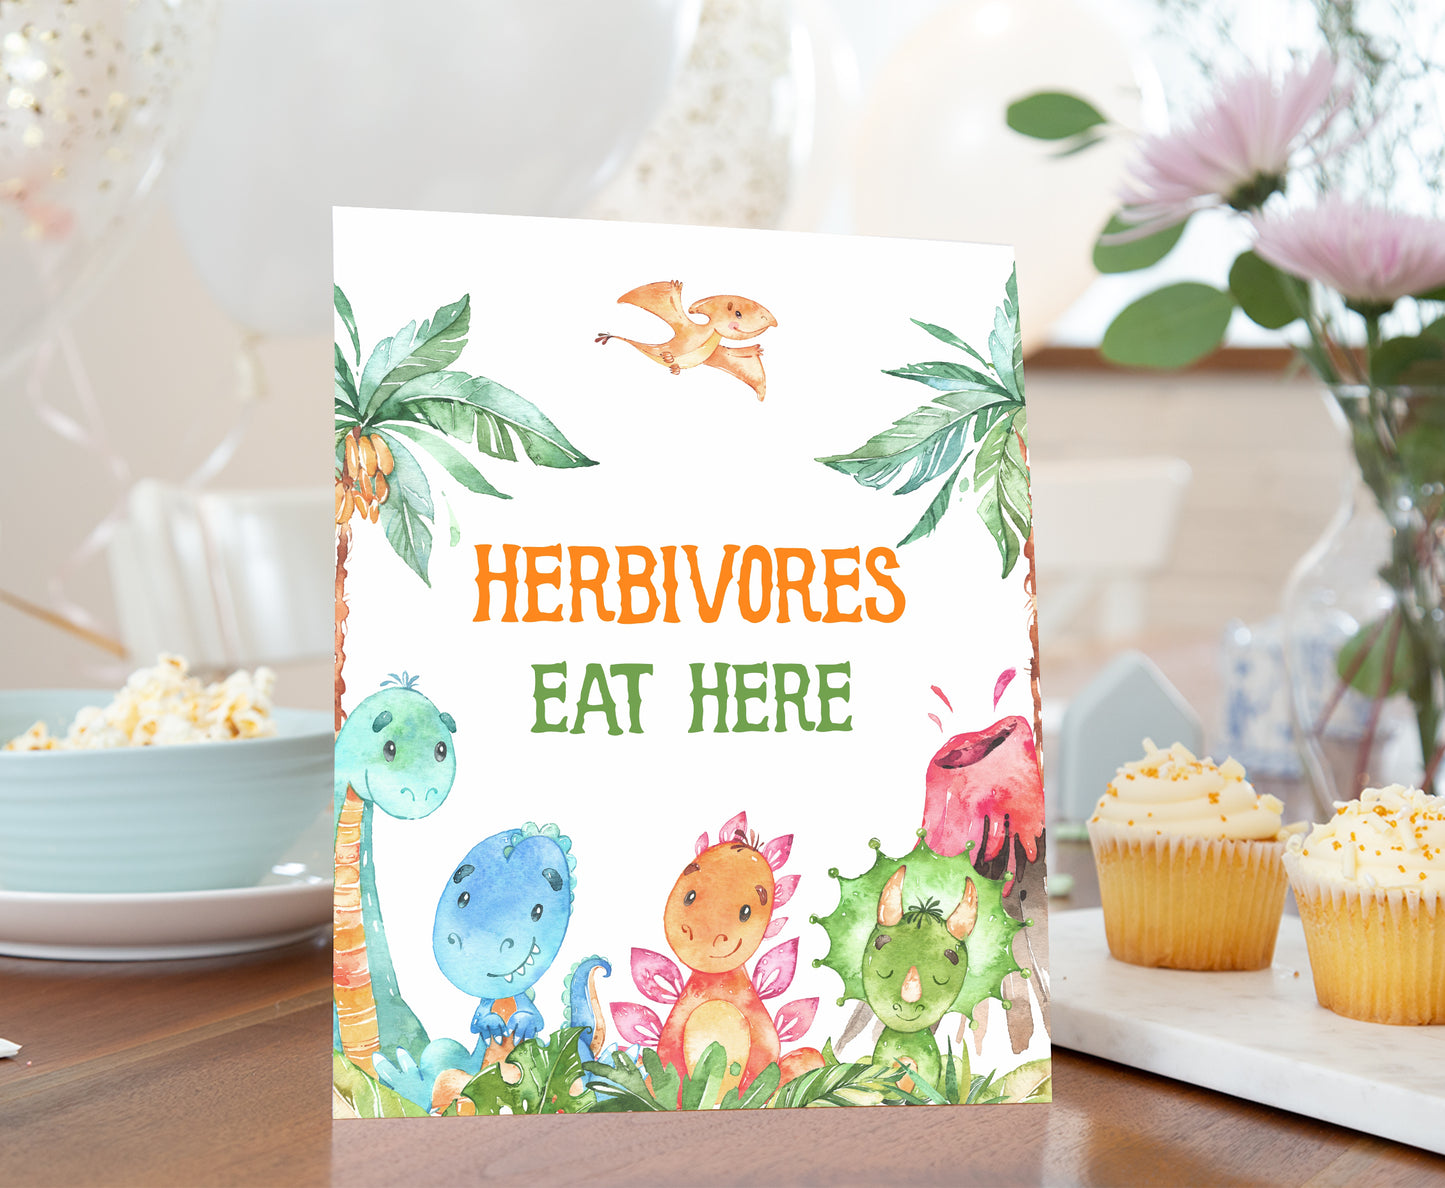 Dinosaur Herbivores Eat Here Sign | Dinosaur Themed Party Table Decorations - 08A